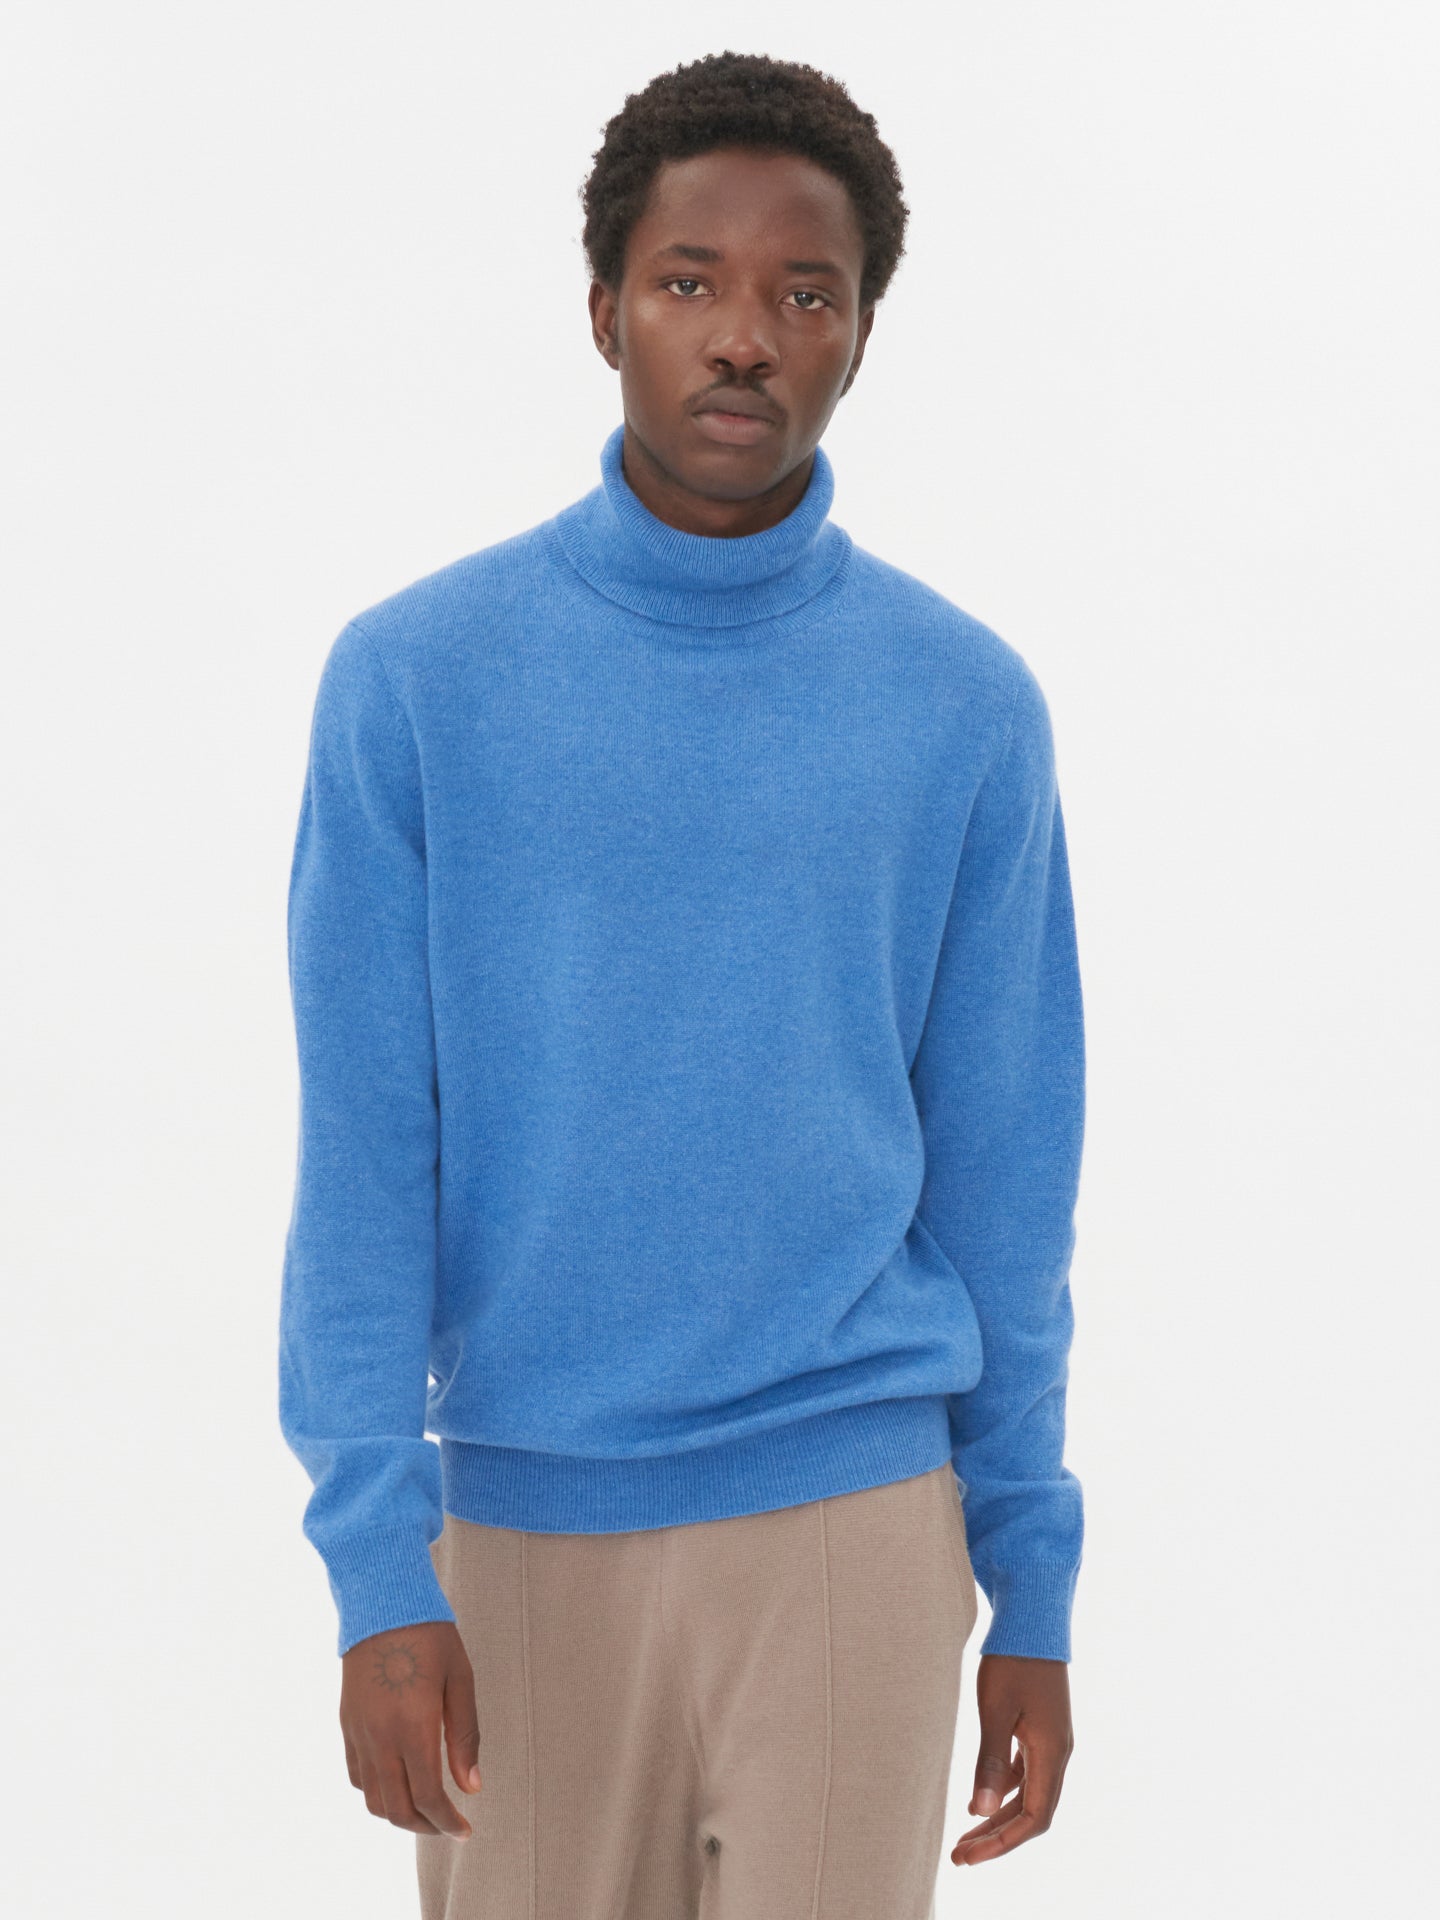 Mens Thick Cashmere Sweater With Slim Fit Turtleneck Mens And Double Collar  For Fall And Winter Slim Fit Knitwear Pullover From Blueberry12, $21.07